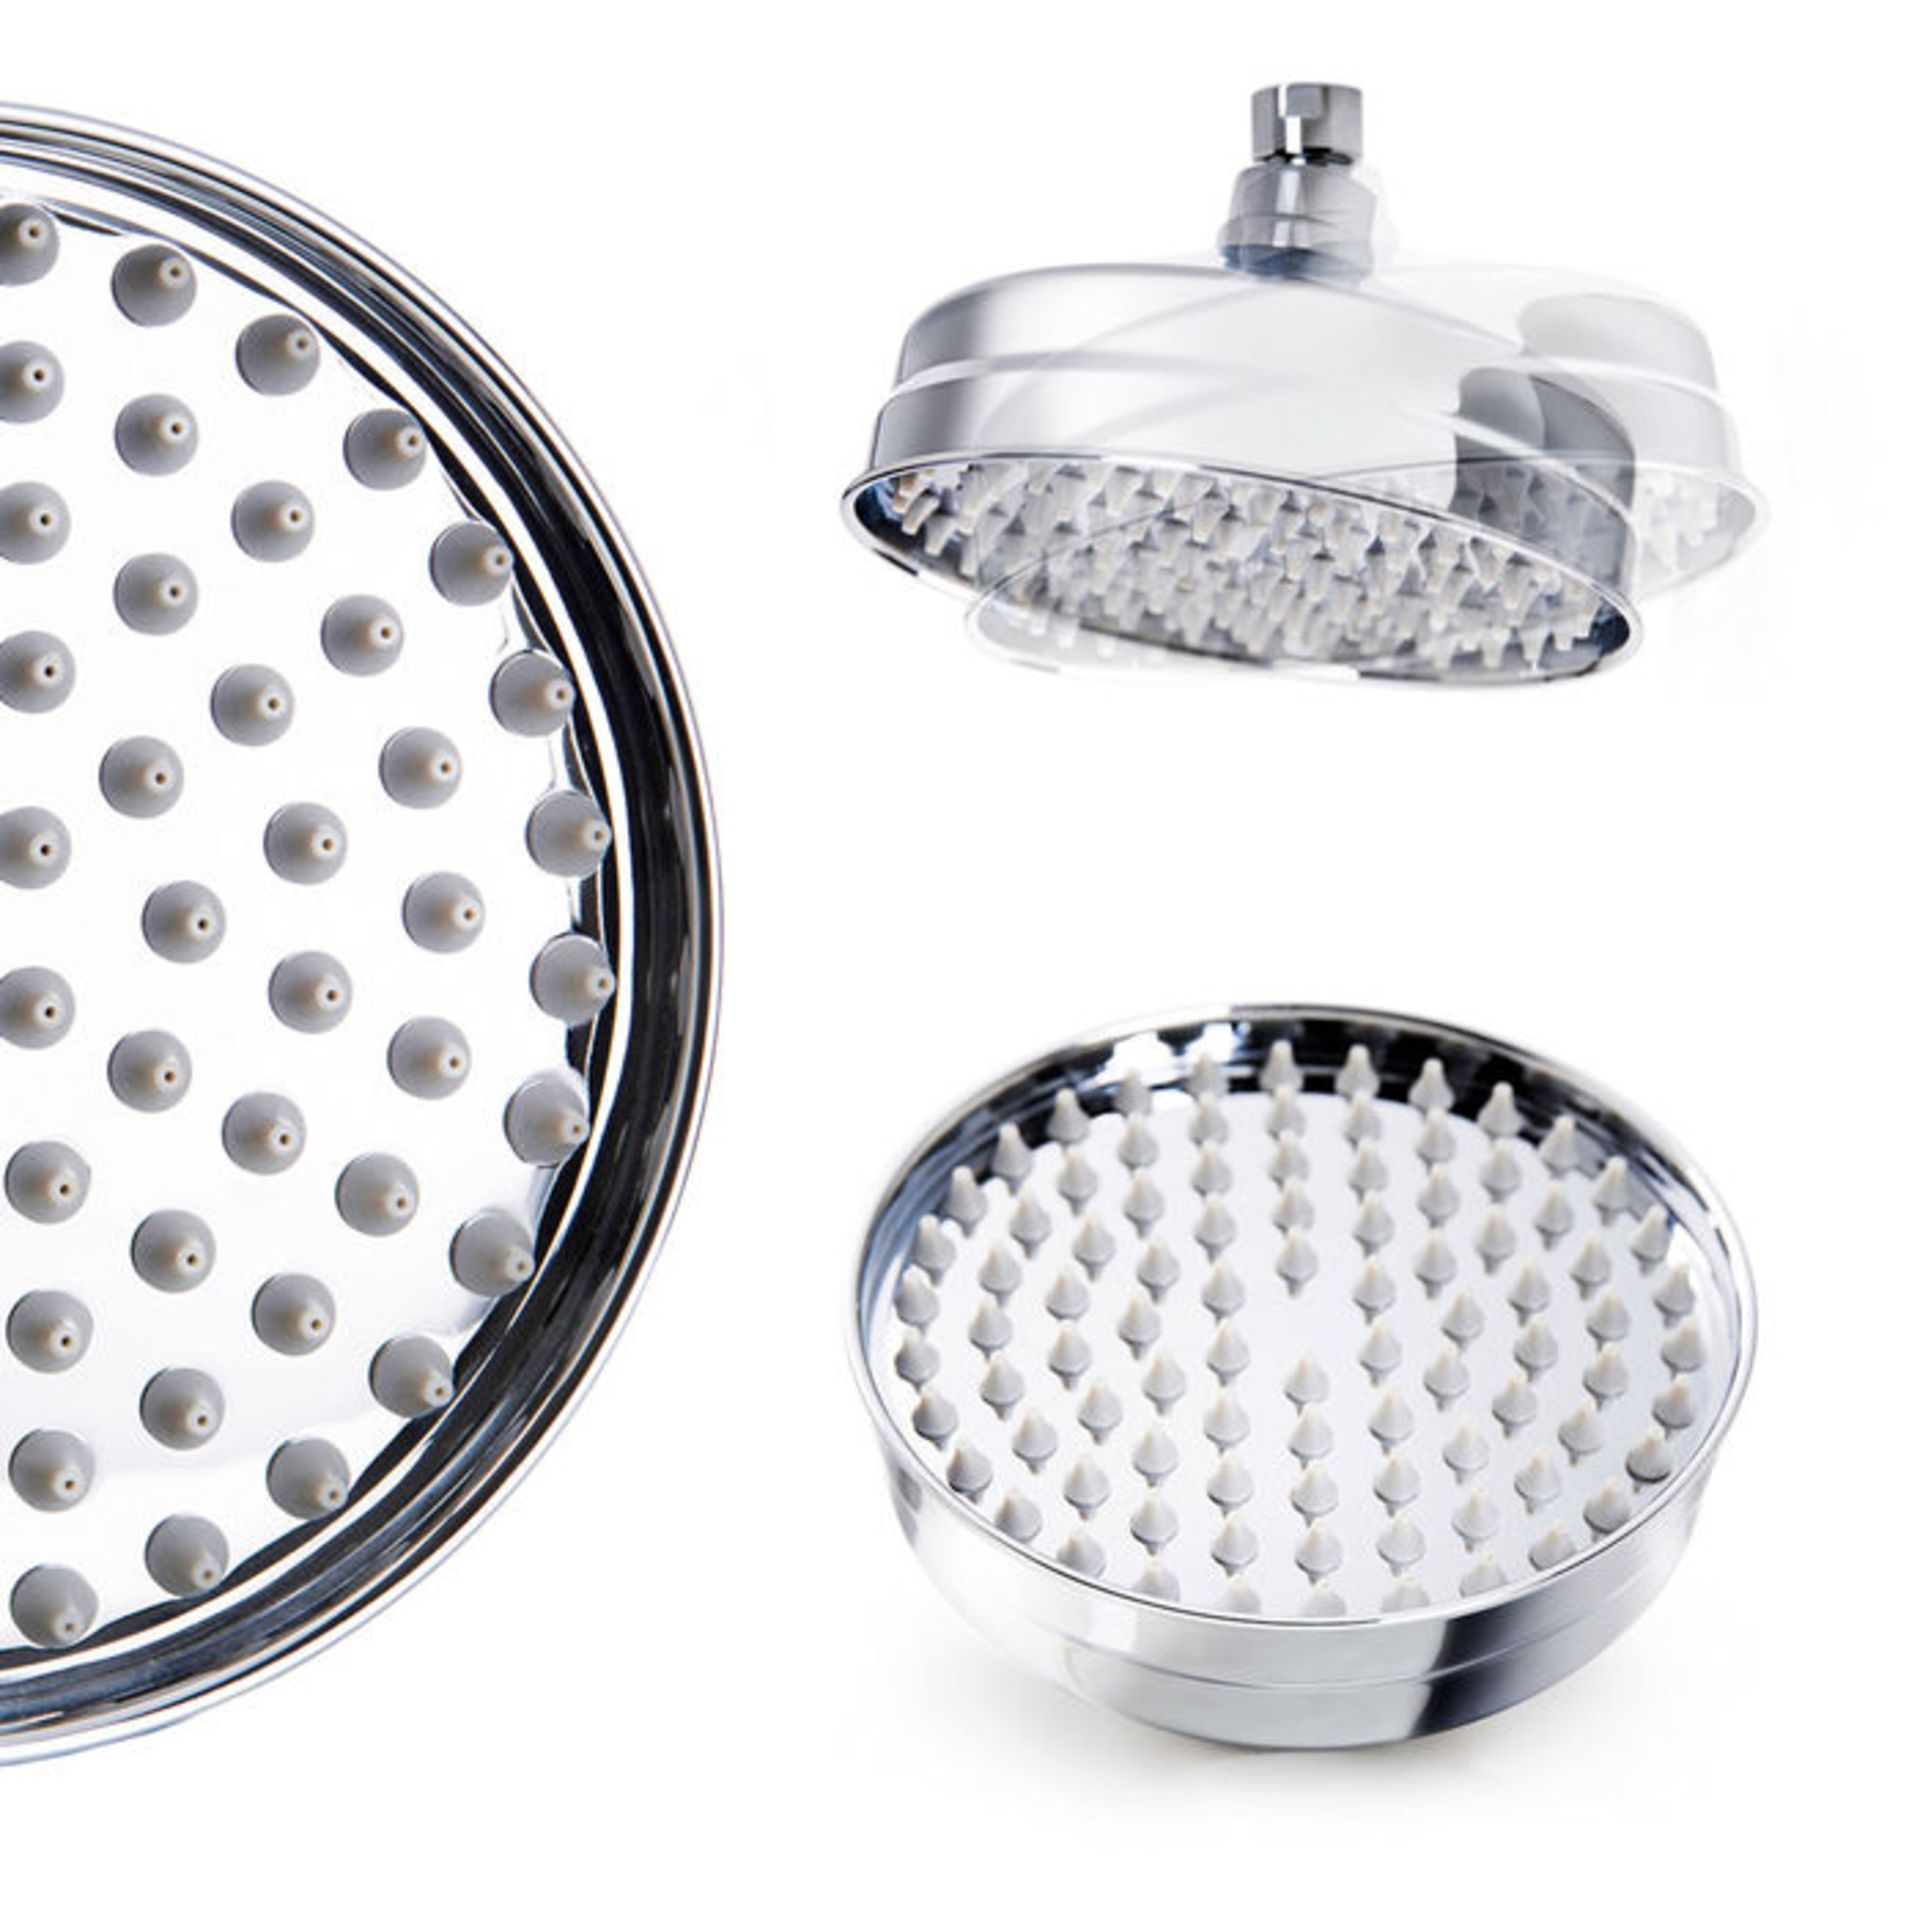 (V25) Stainless Steel 150mm Traditional Round Shower Head Finished in high quality polished chrome - Image 2 of 2